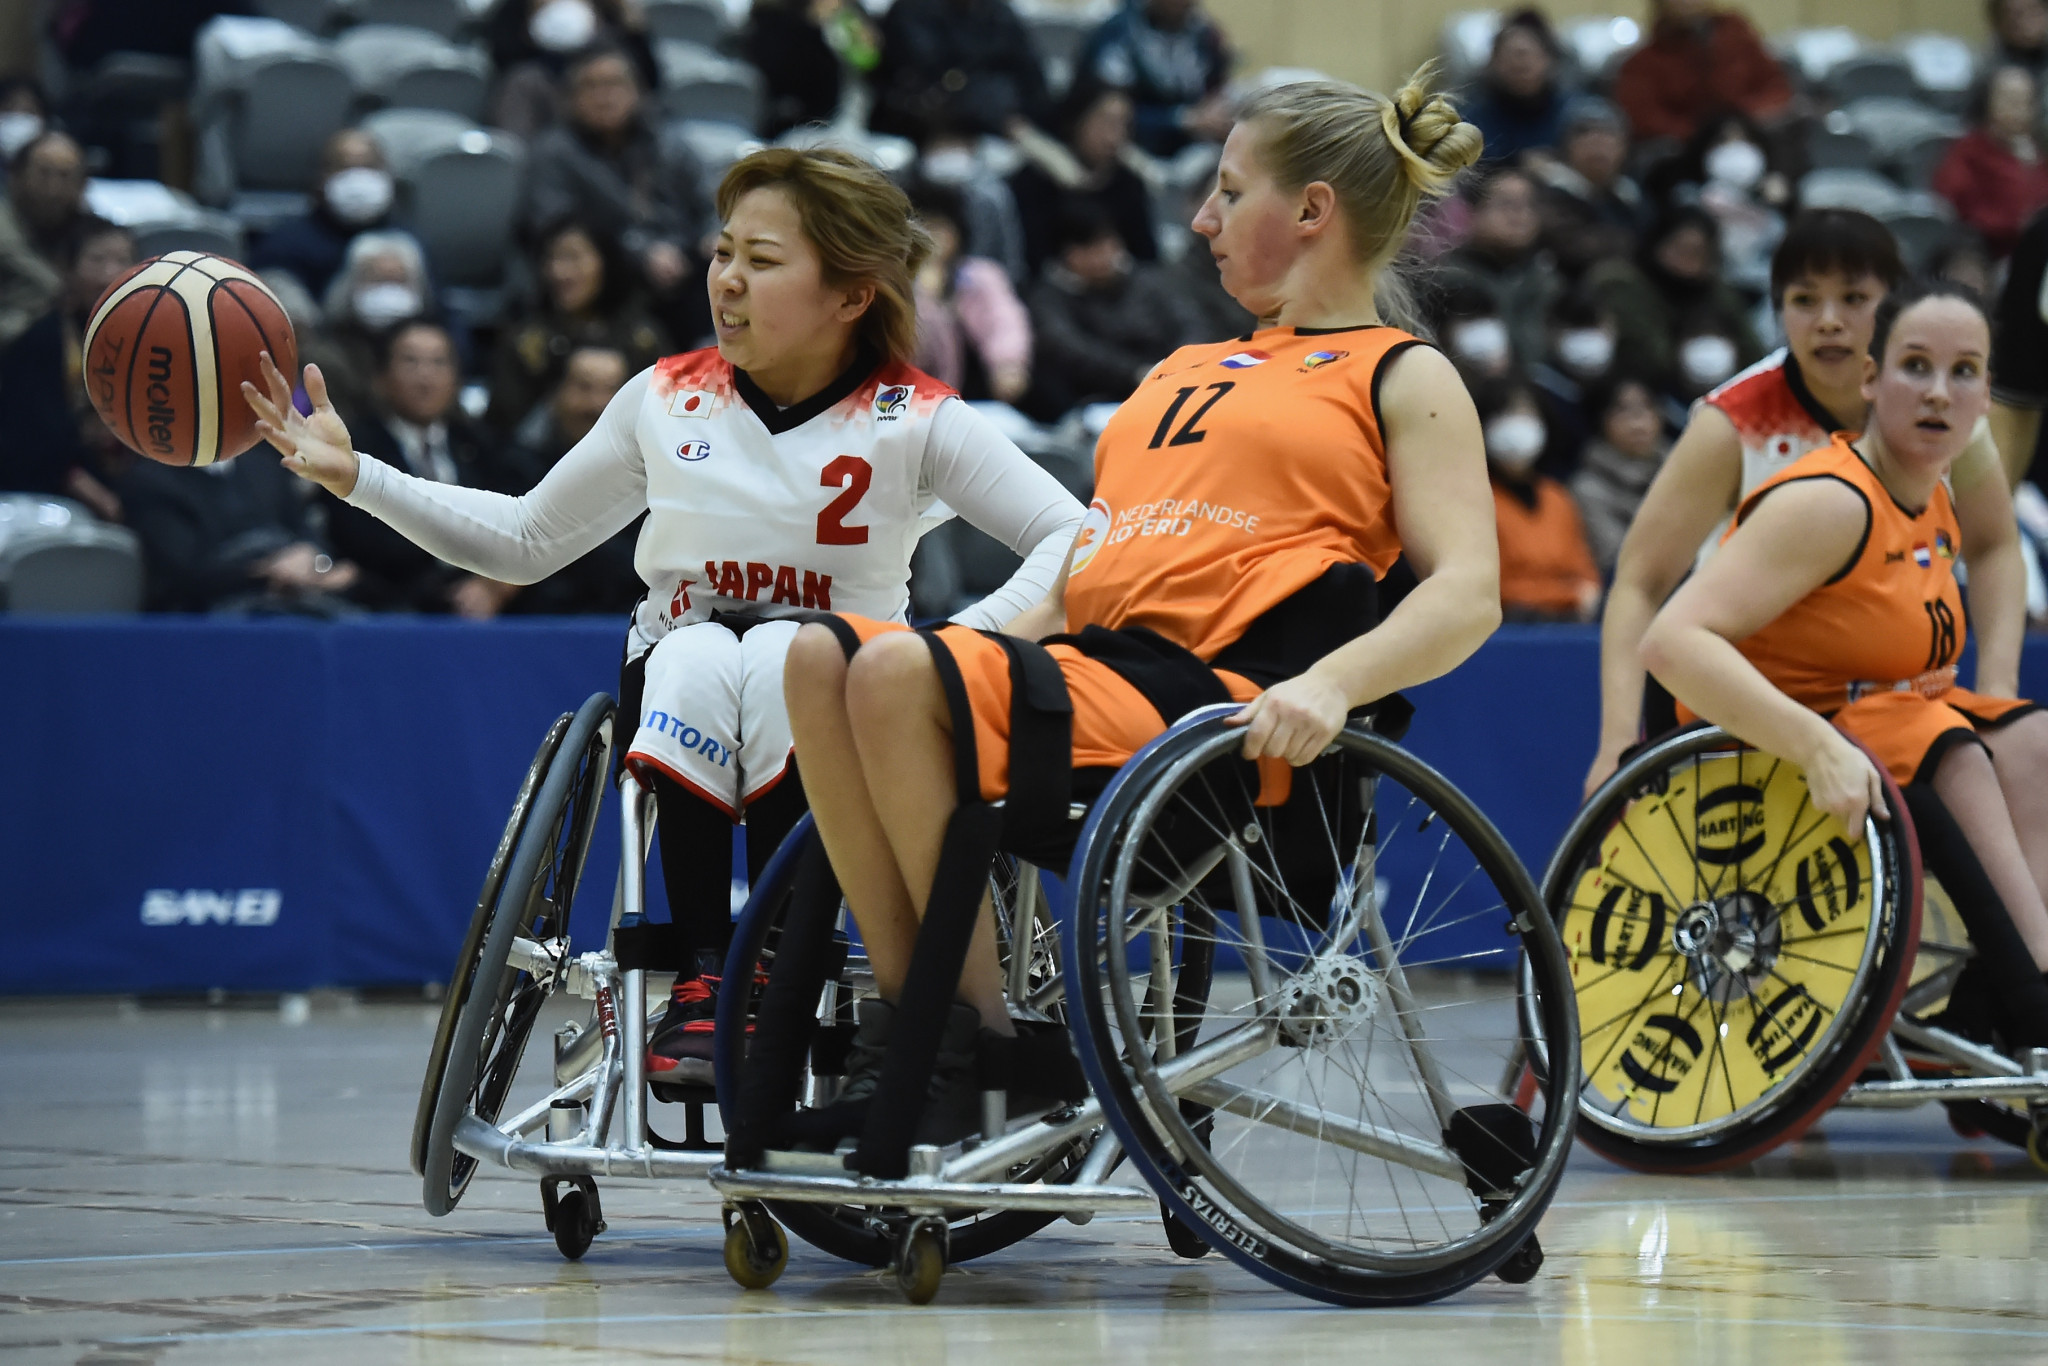 Wheelchair basketball players participate in "Don't Rush" challenge